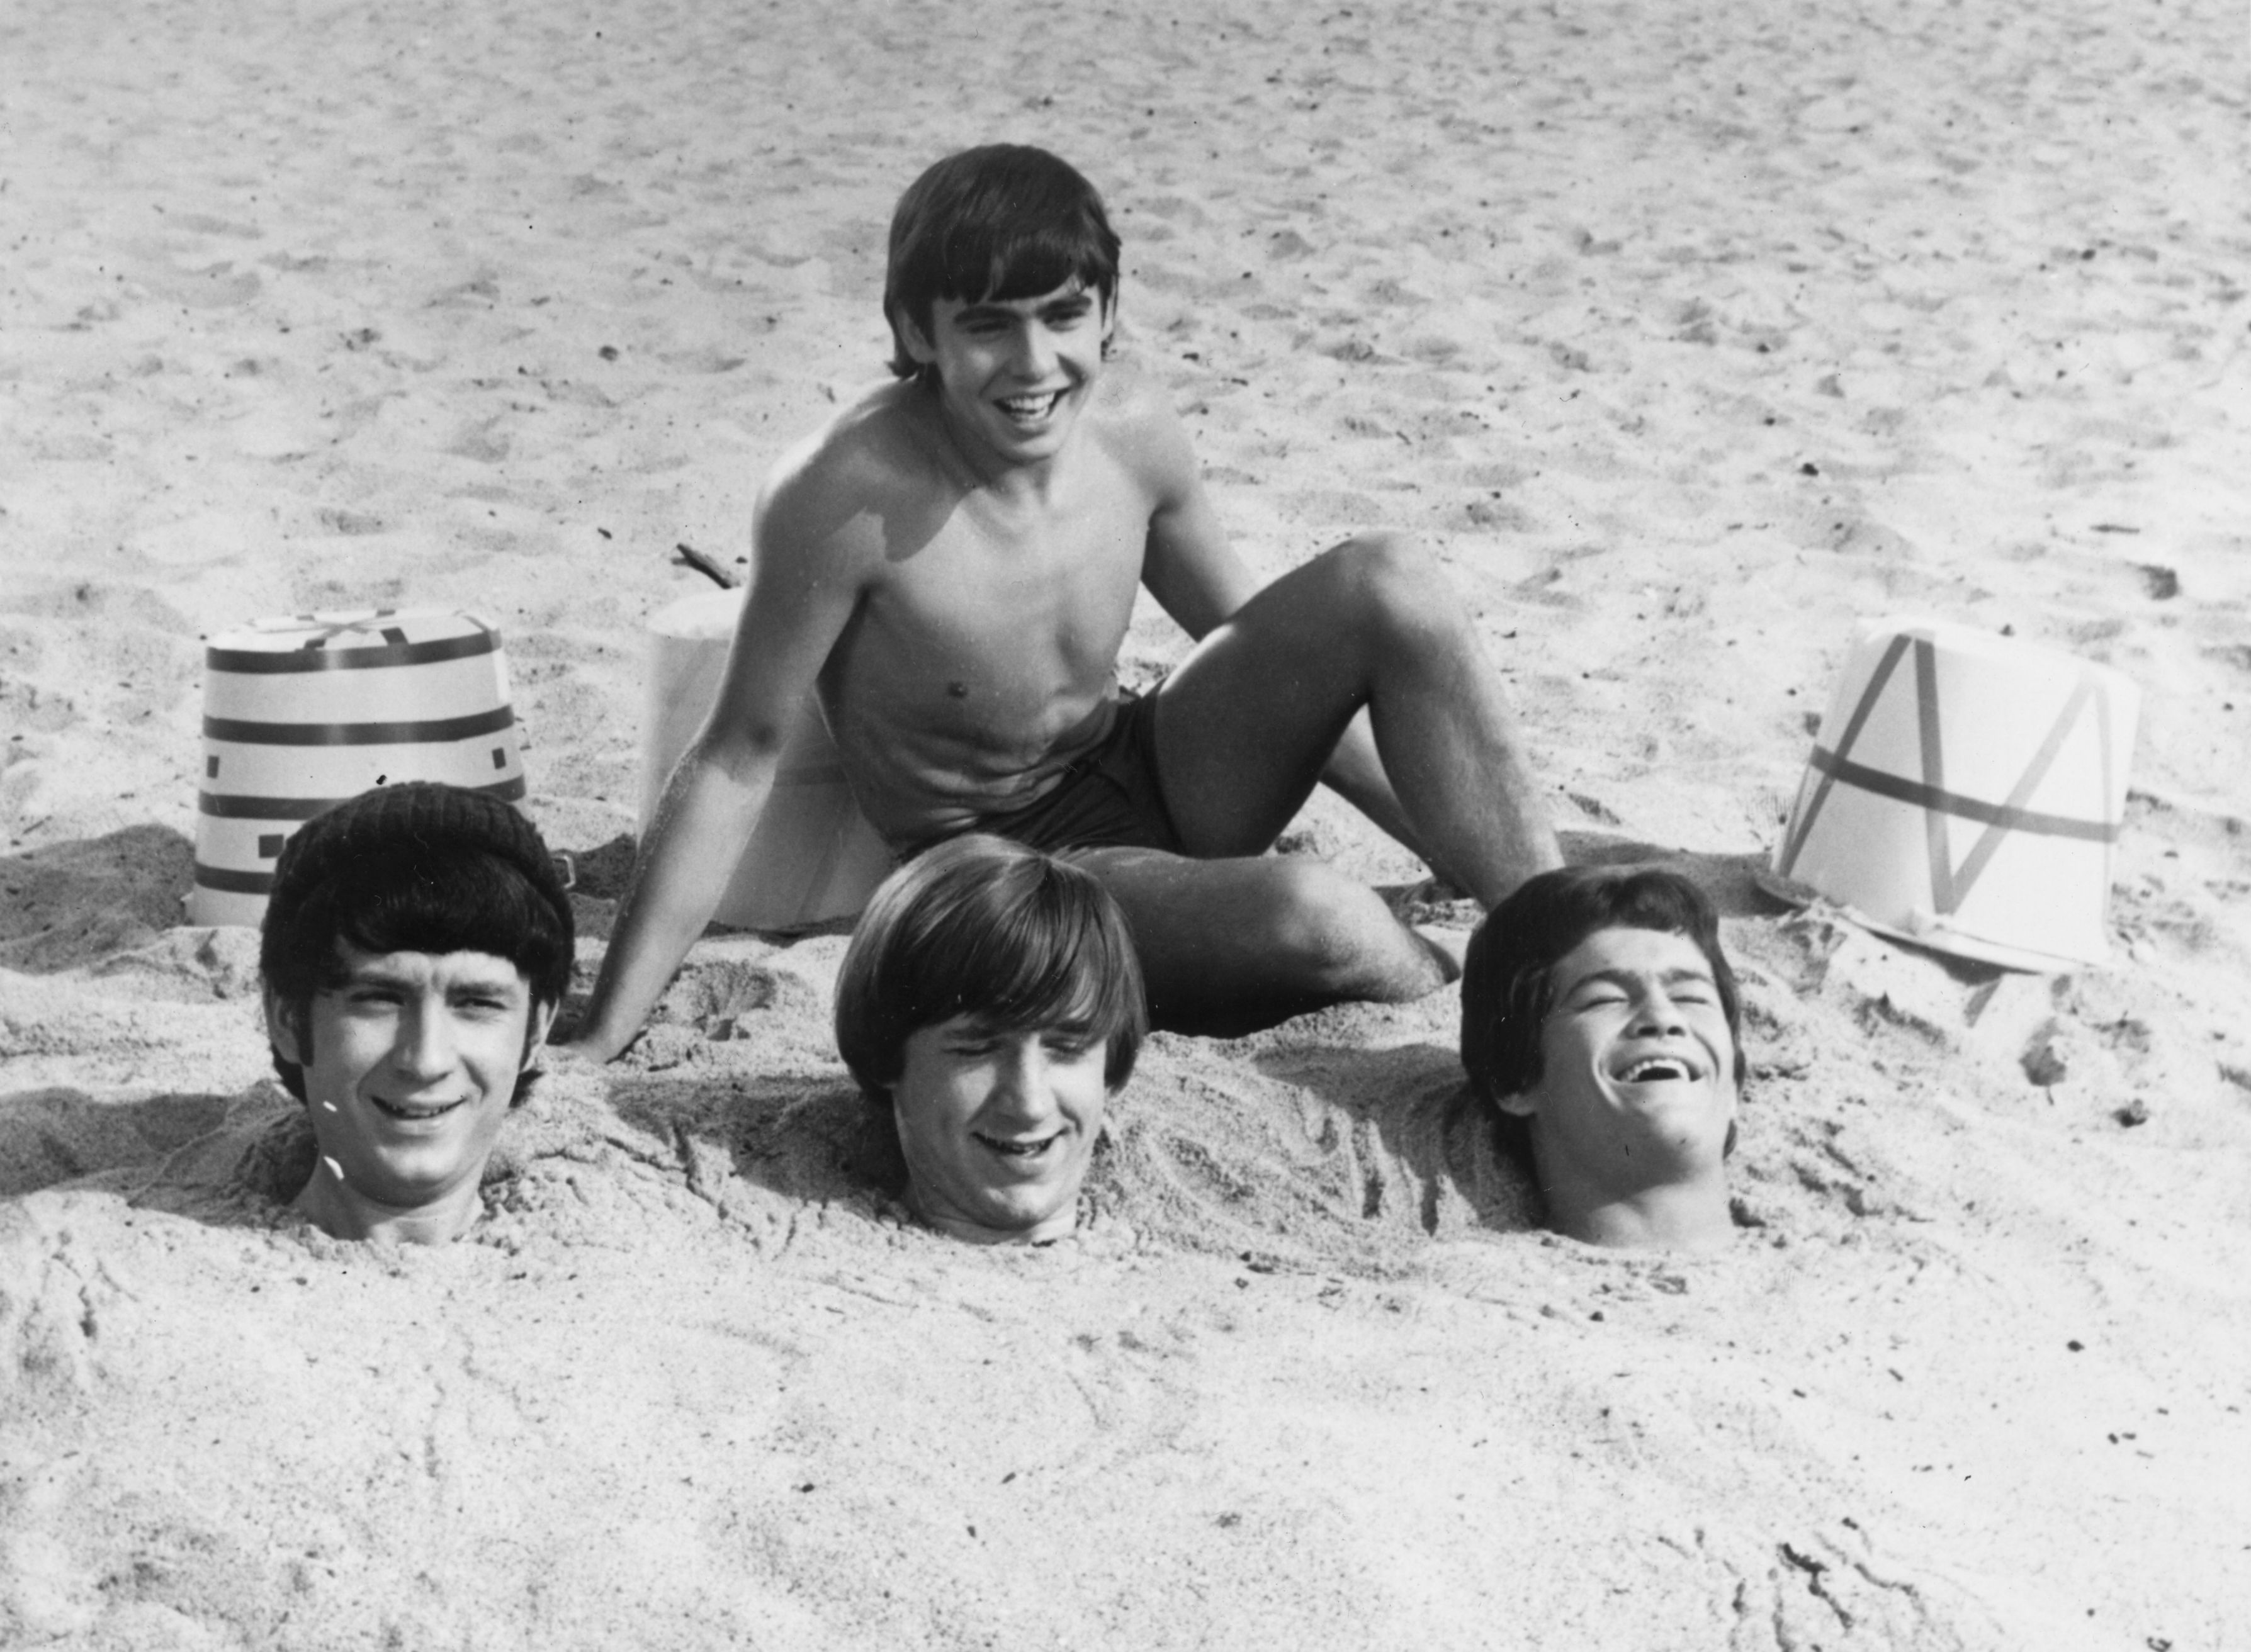 The Monkees' Mike Nesmith, Davy Jones, Peter Tork, and Micky Dolenz on a beach